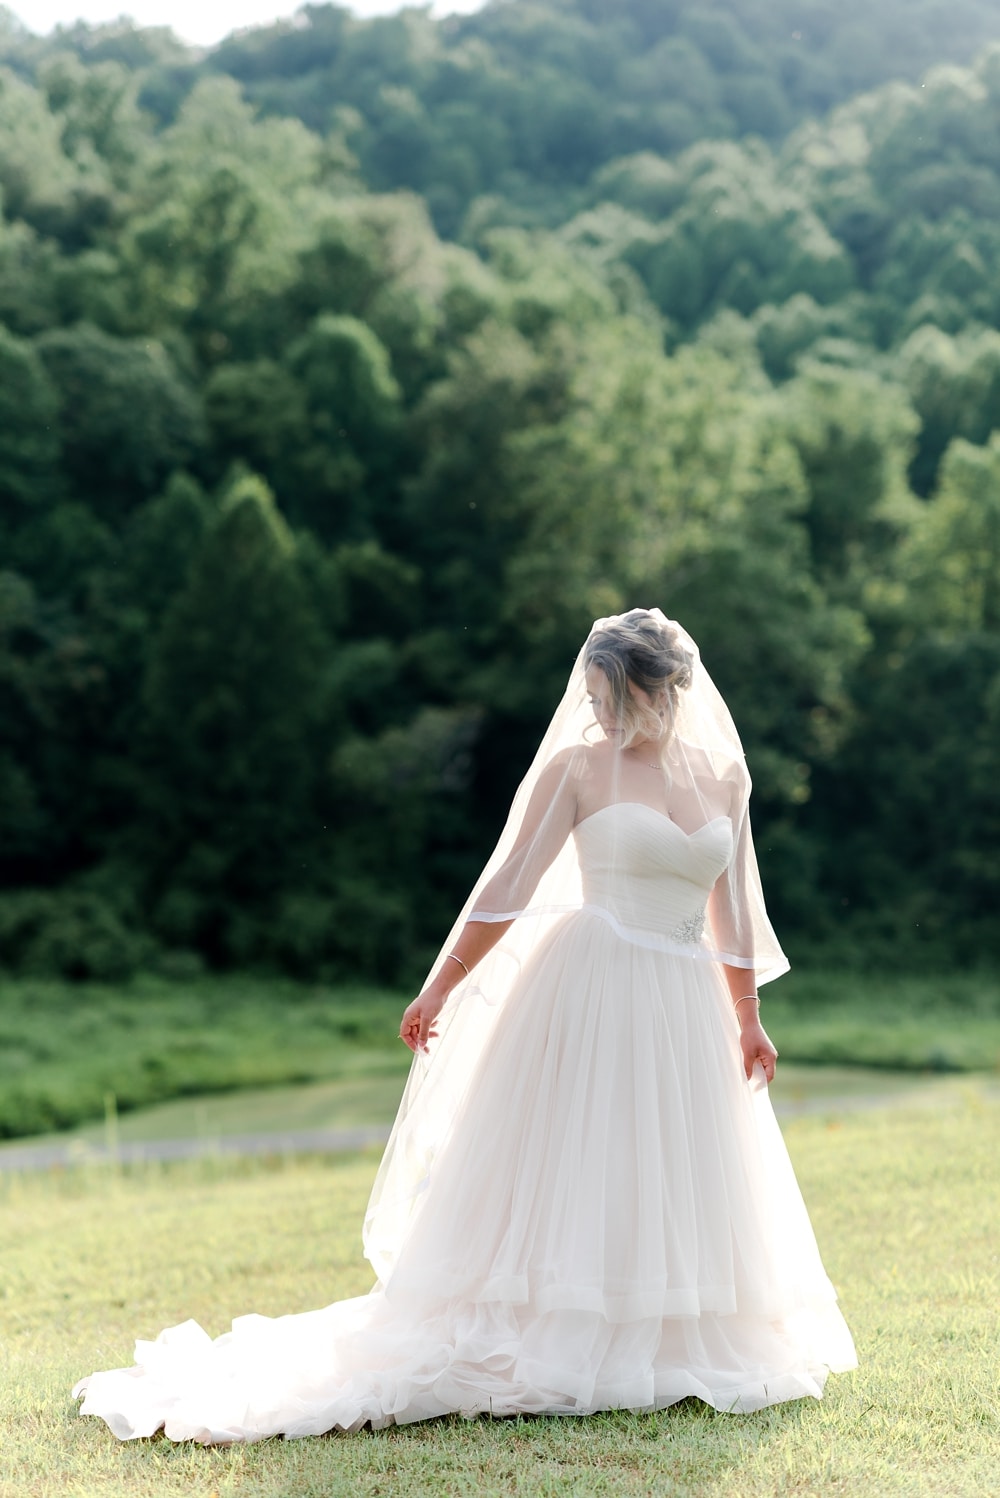 Bride backlit from sun at DelFosse Vineyards and Winery near Charlottesville VA